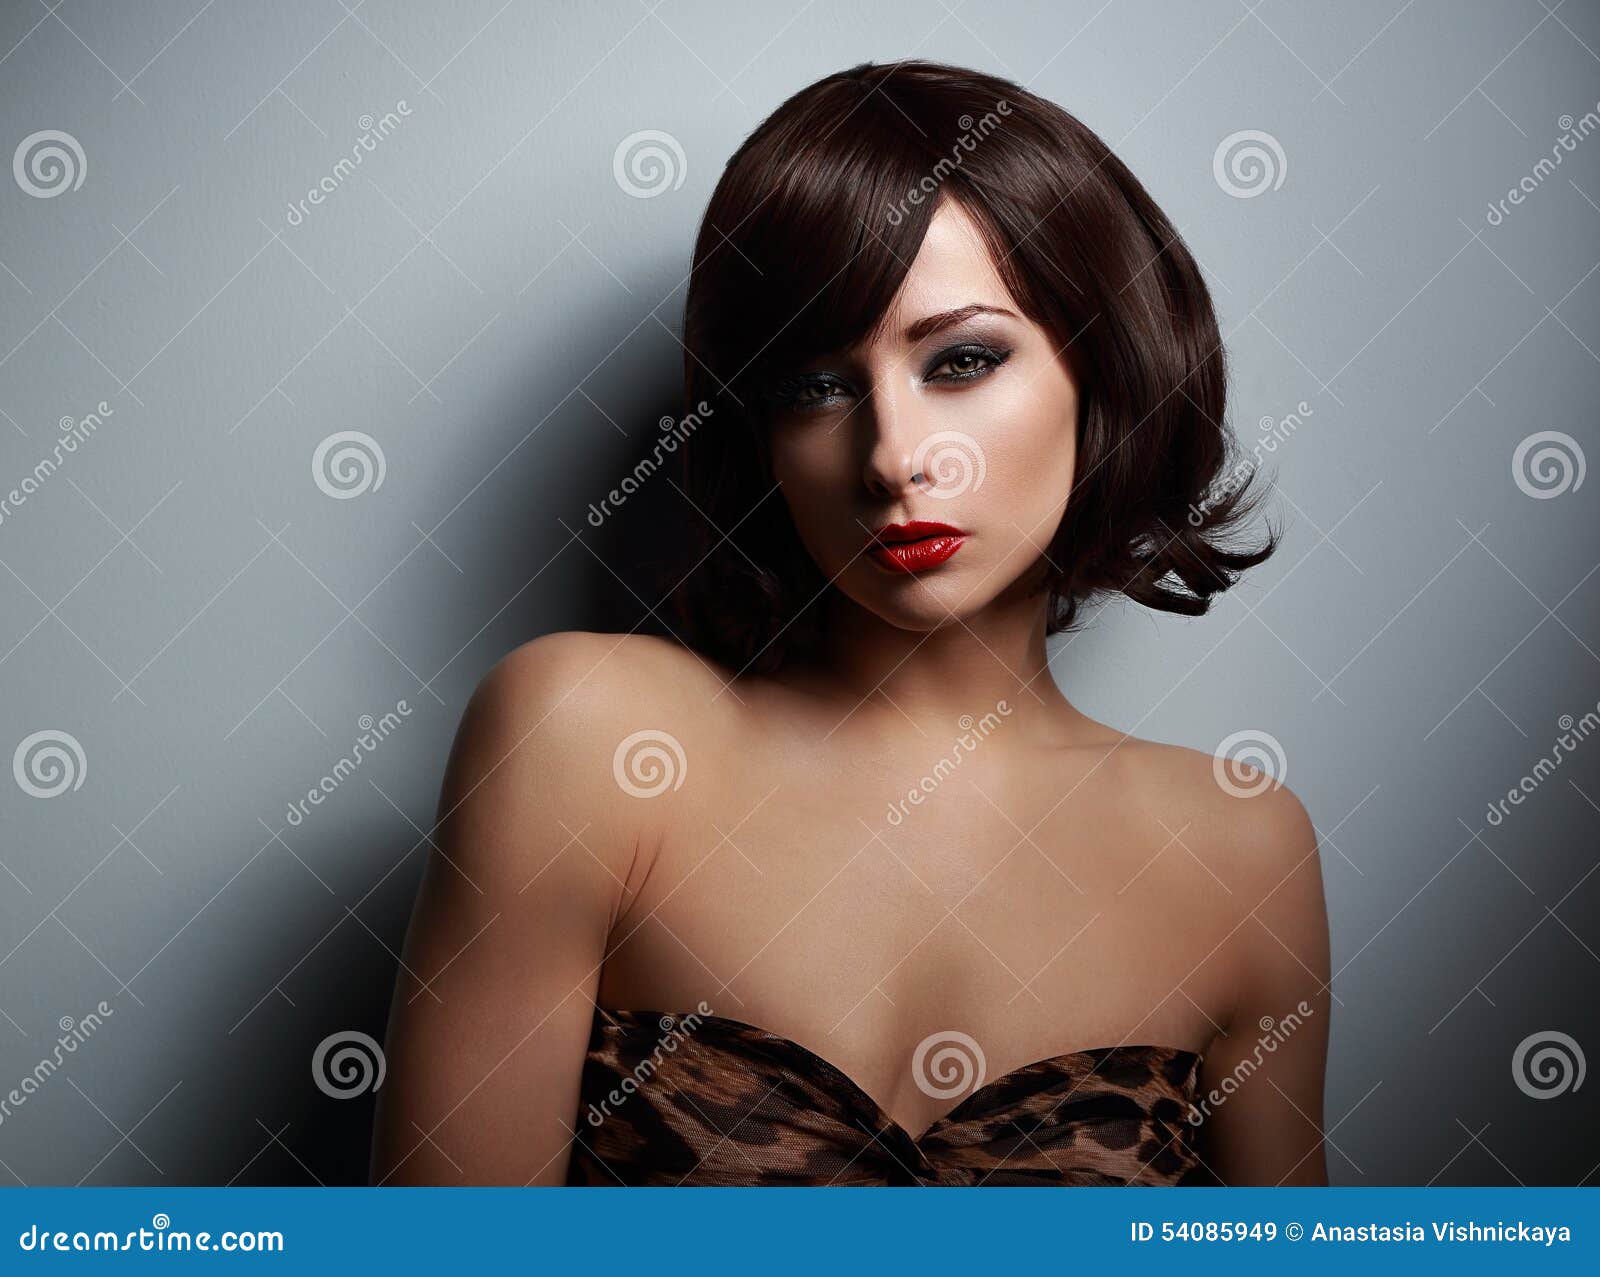 Sexual Woman with Black Short Hair Looking on Dark Background Stock Image pic